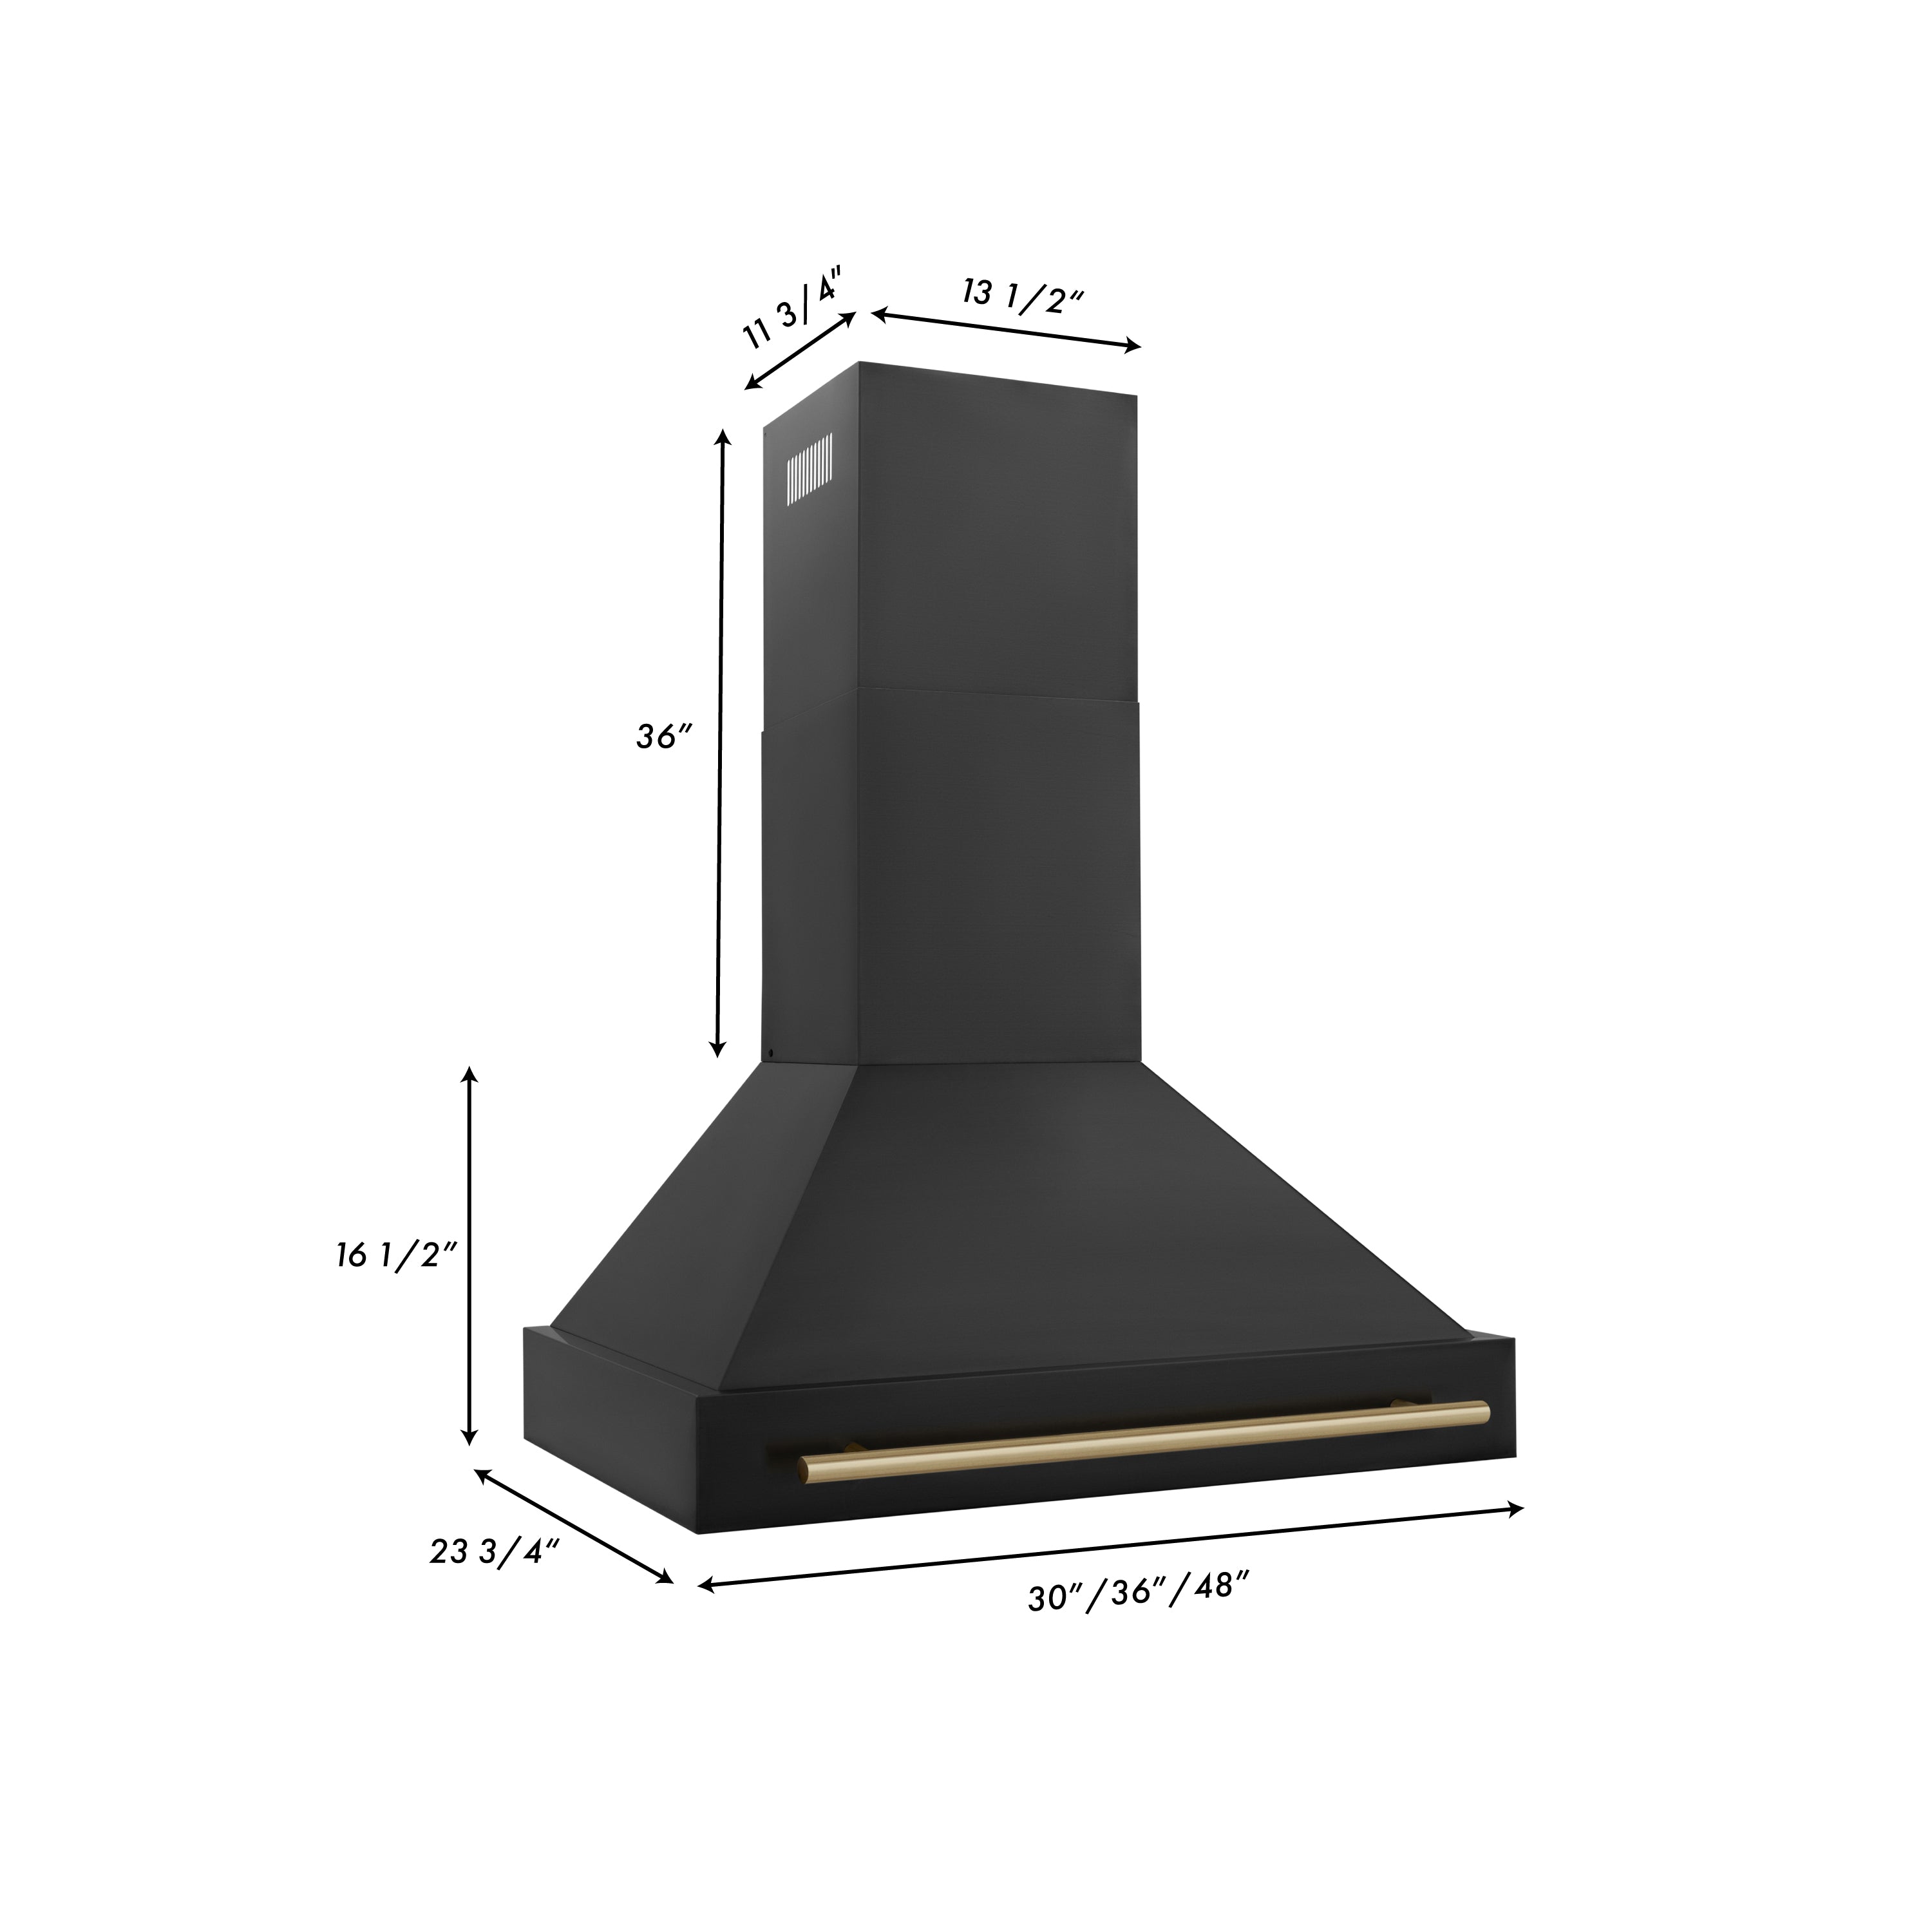 ZLINE Autograph Edition 36 in. Kitchen Package with Black Stainless Steel Dual Fuel Range, Range Hood and Dishwasher with Polished Gold Accents (3AKP-RABRHDWV36-G) dimensional diagram with measurements.